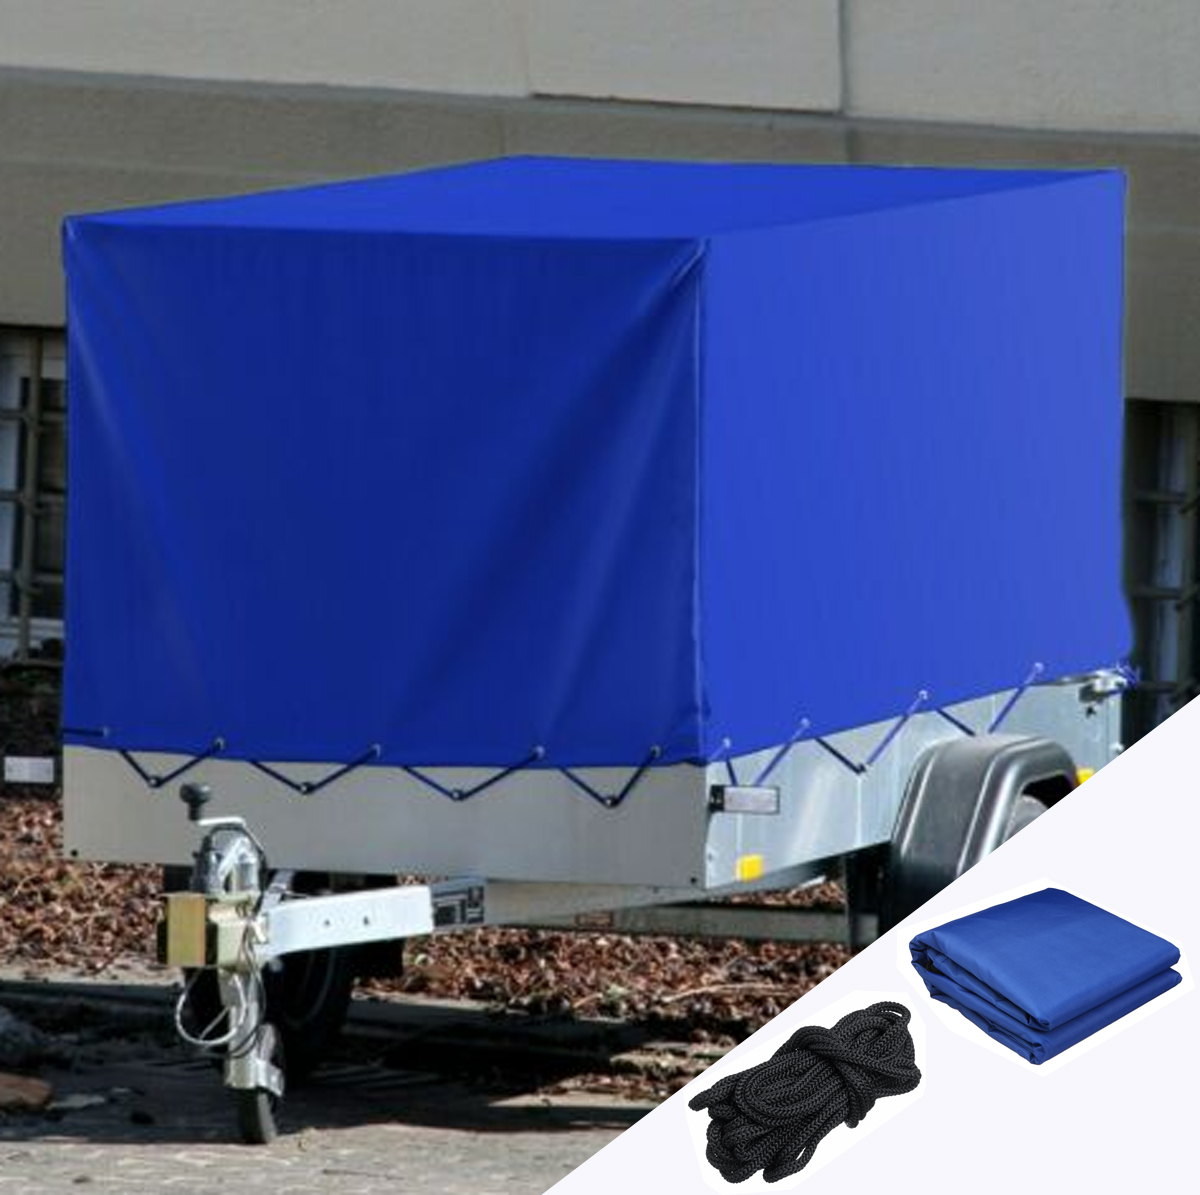 

207.5x114x90cm Cover Waterproof Protector for Trailer Truck Transfer Car Vehicle Tools Kit